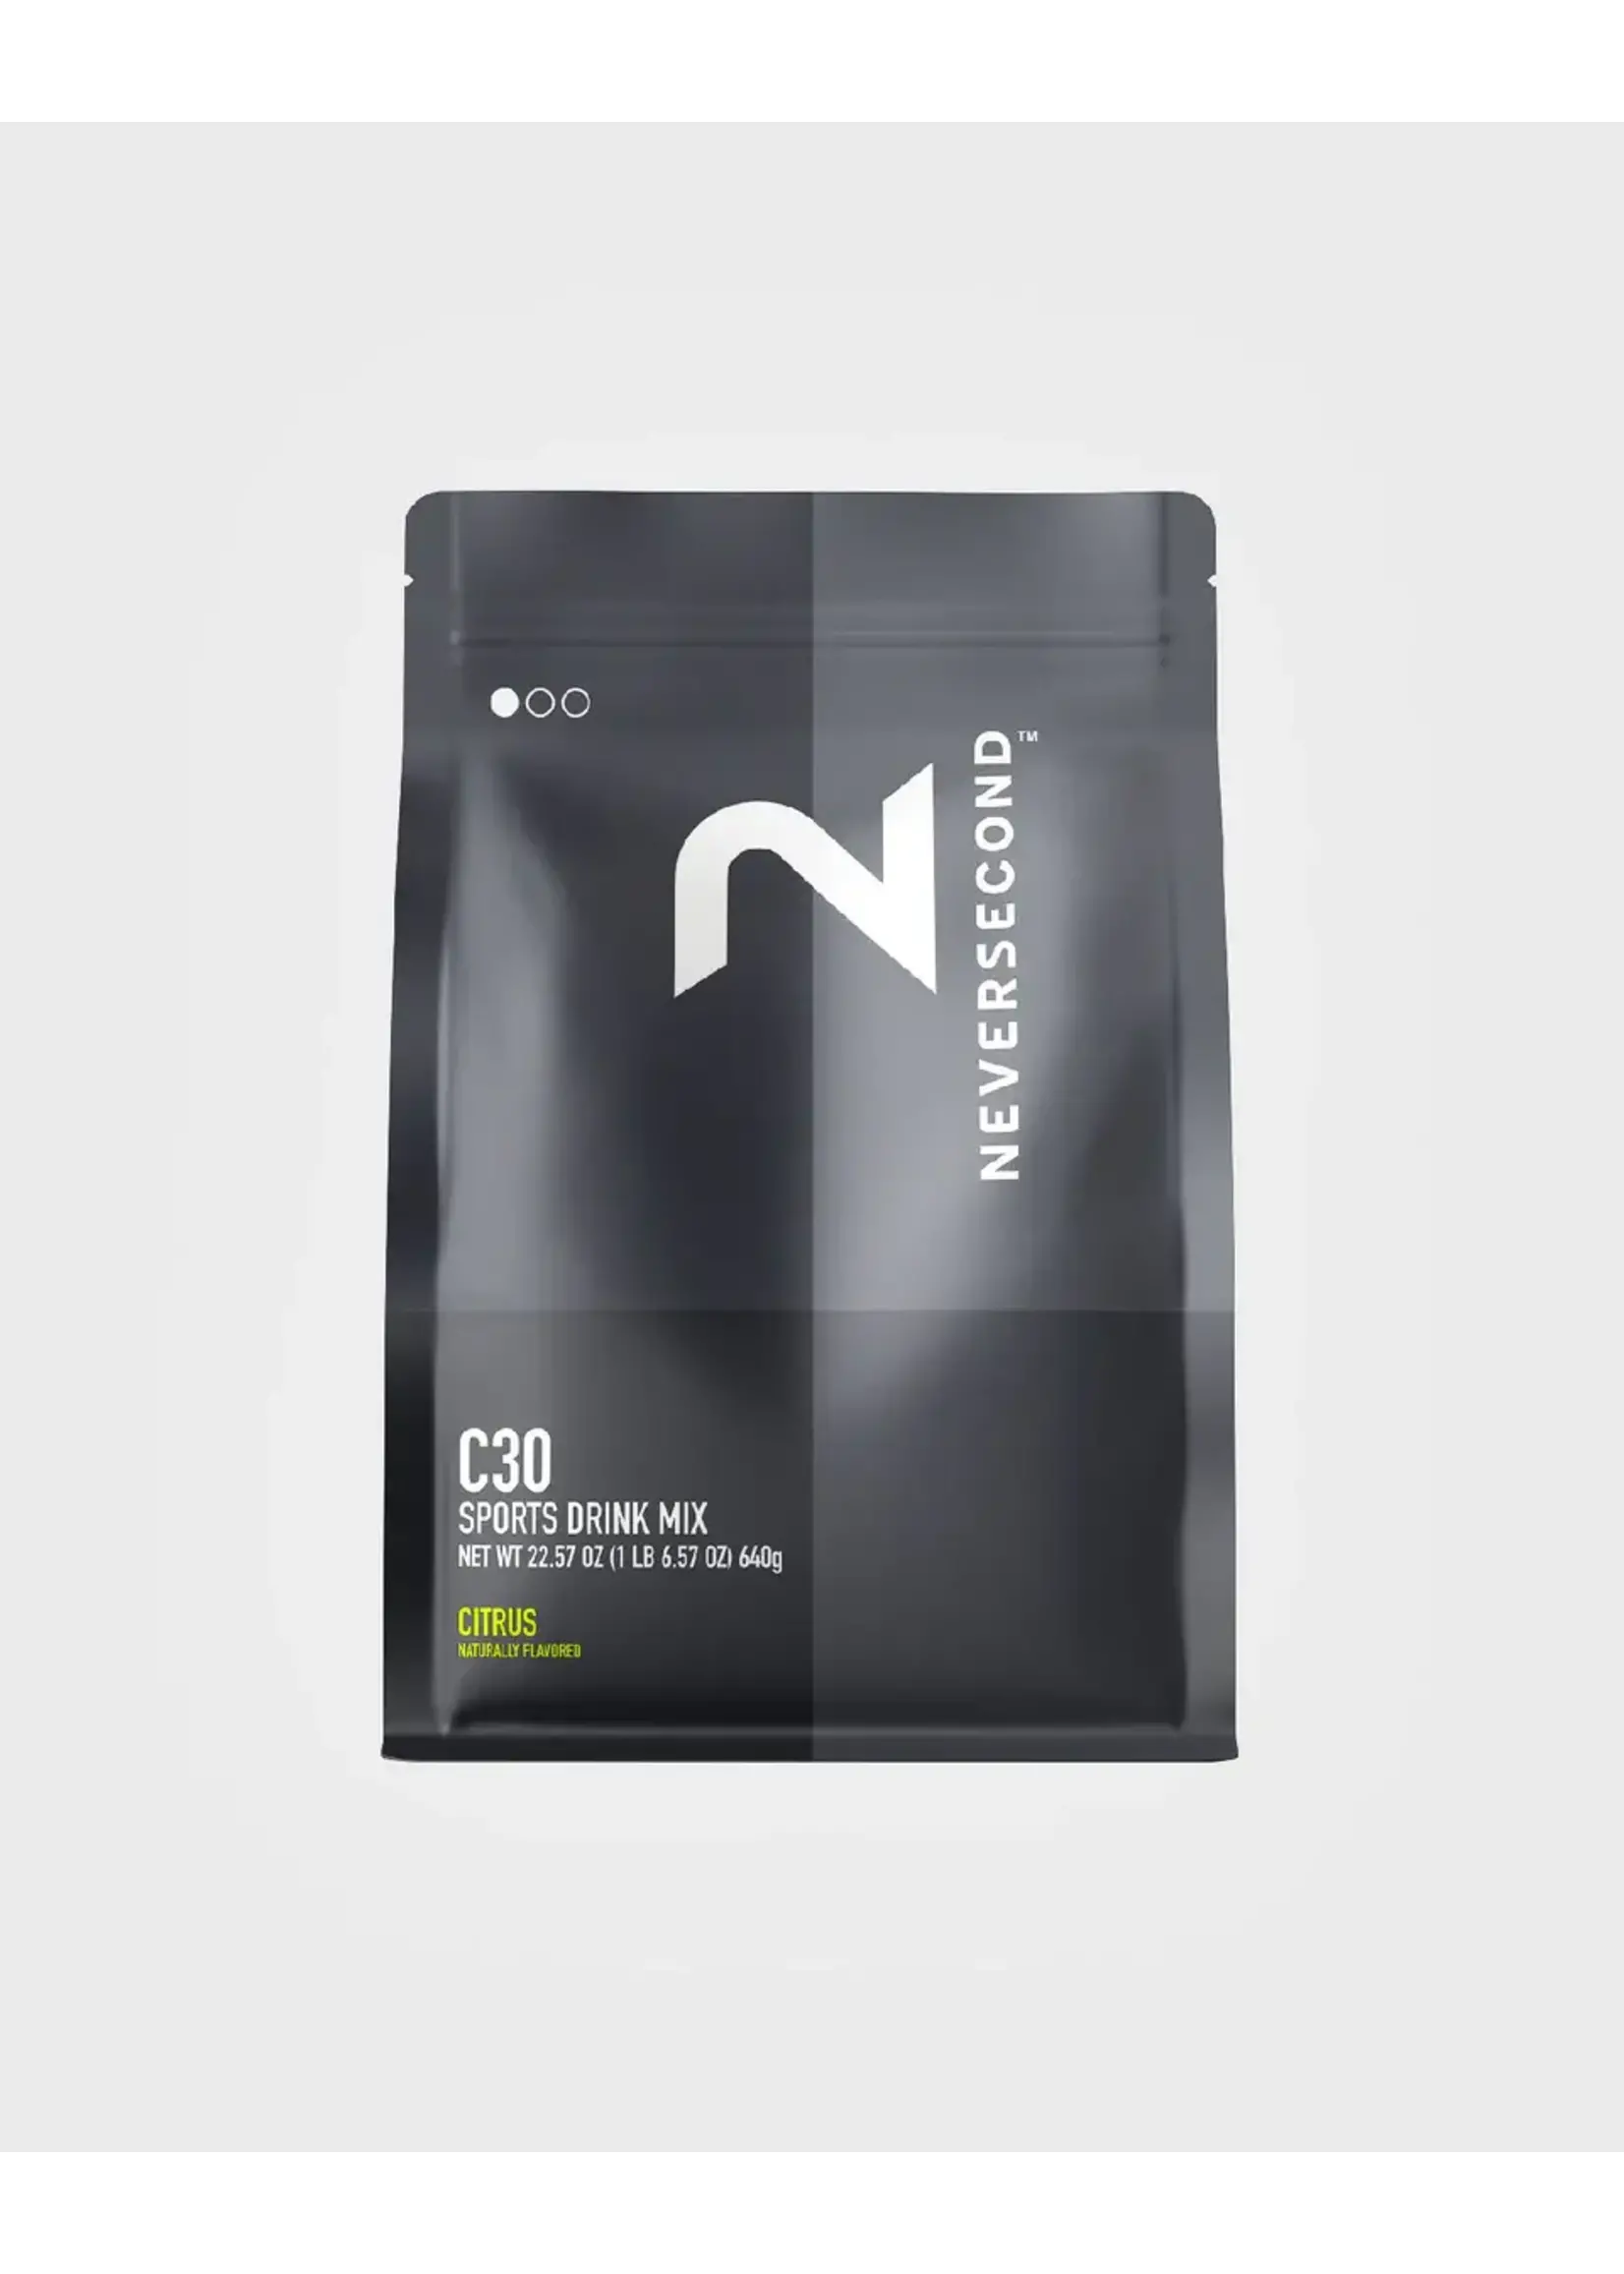 Neversecond C30 SPORTS DRINK- 20 Serving